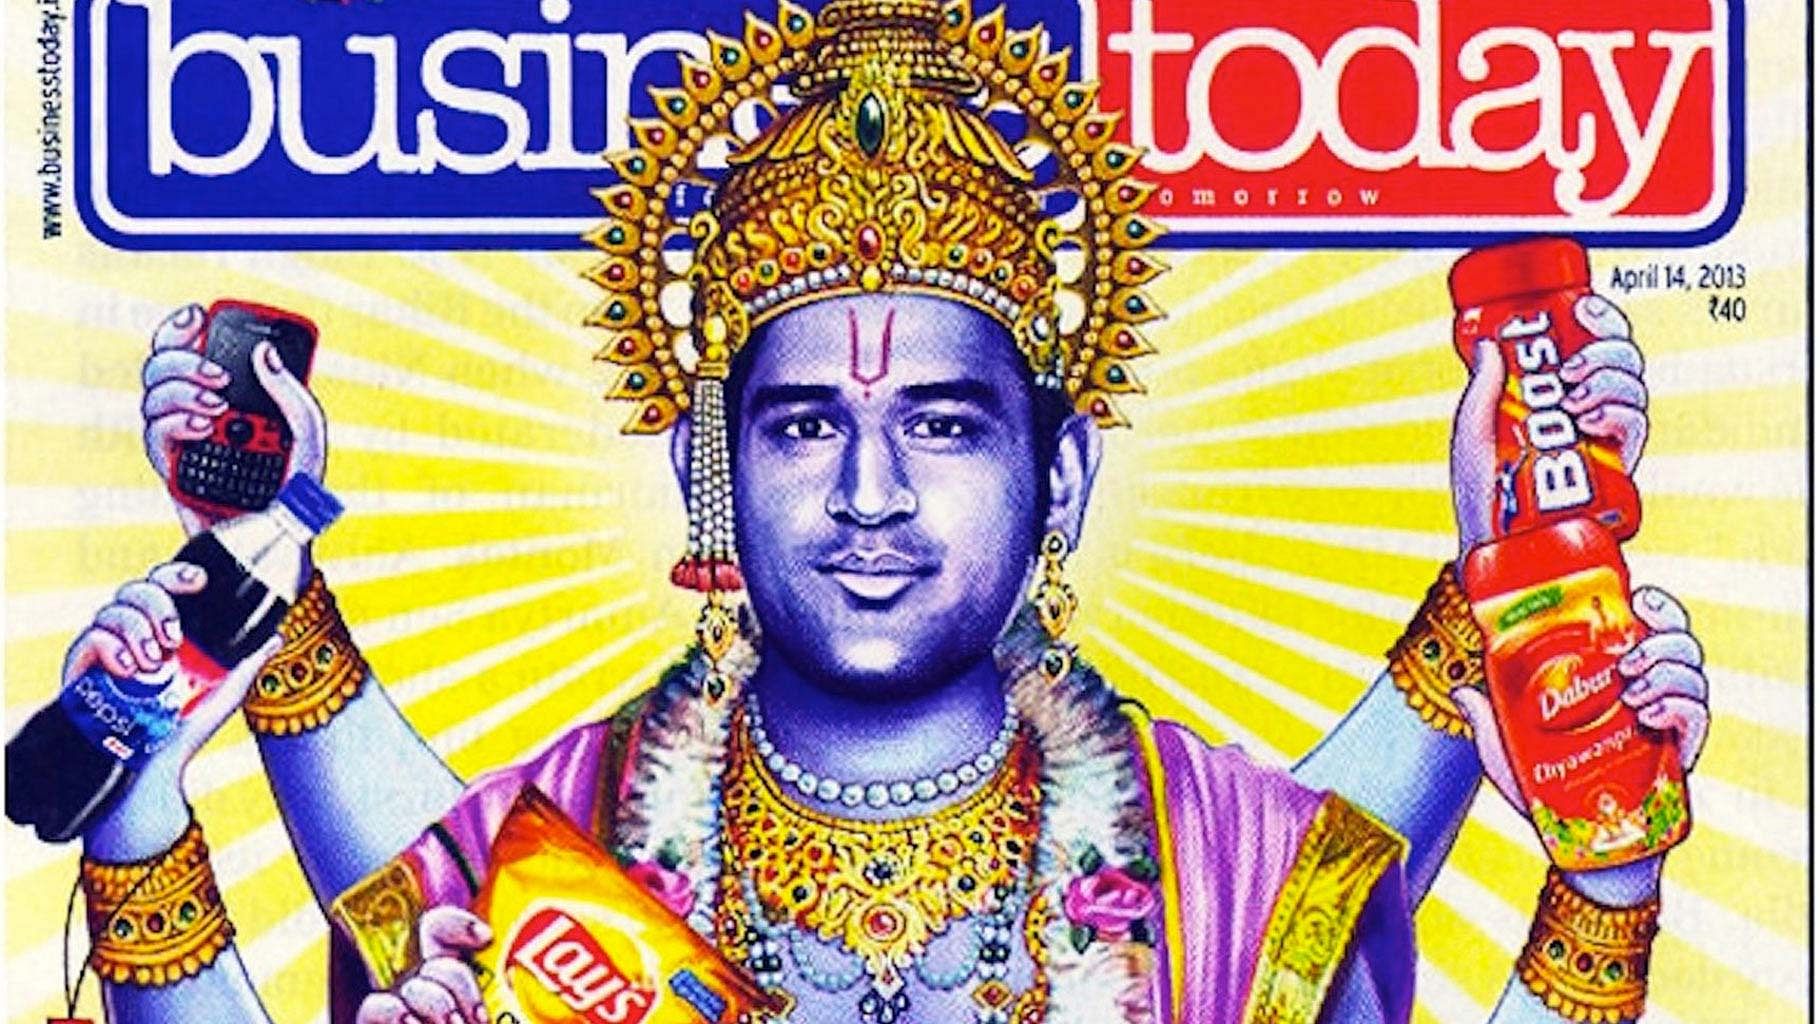 MS Dhoni as Vishnu on the cover of <i>Business Today</i> hurt ‘religious sentiments.’ (Photo courtesy: <i>Business Today</i>)